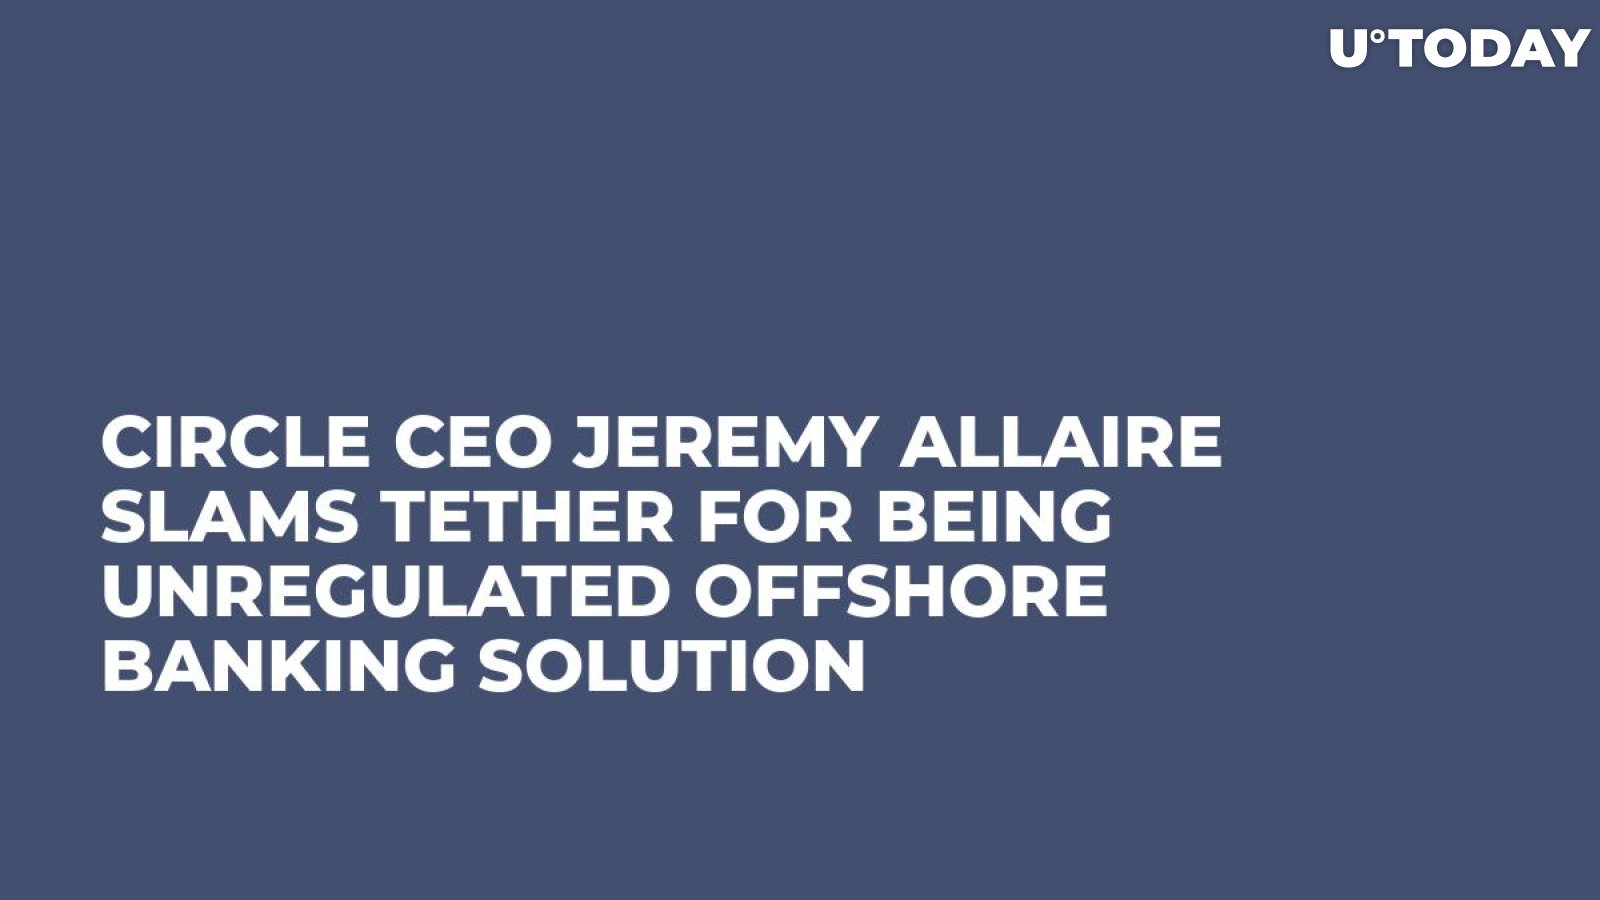 Circle CEO Jeremy Allaire Slams Tether for Being Unregulated Offshore Banking Solution  